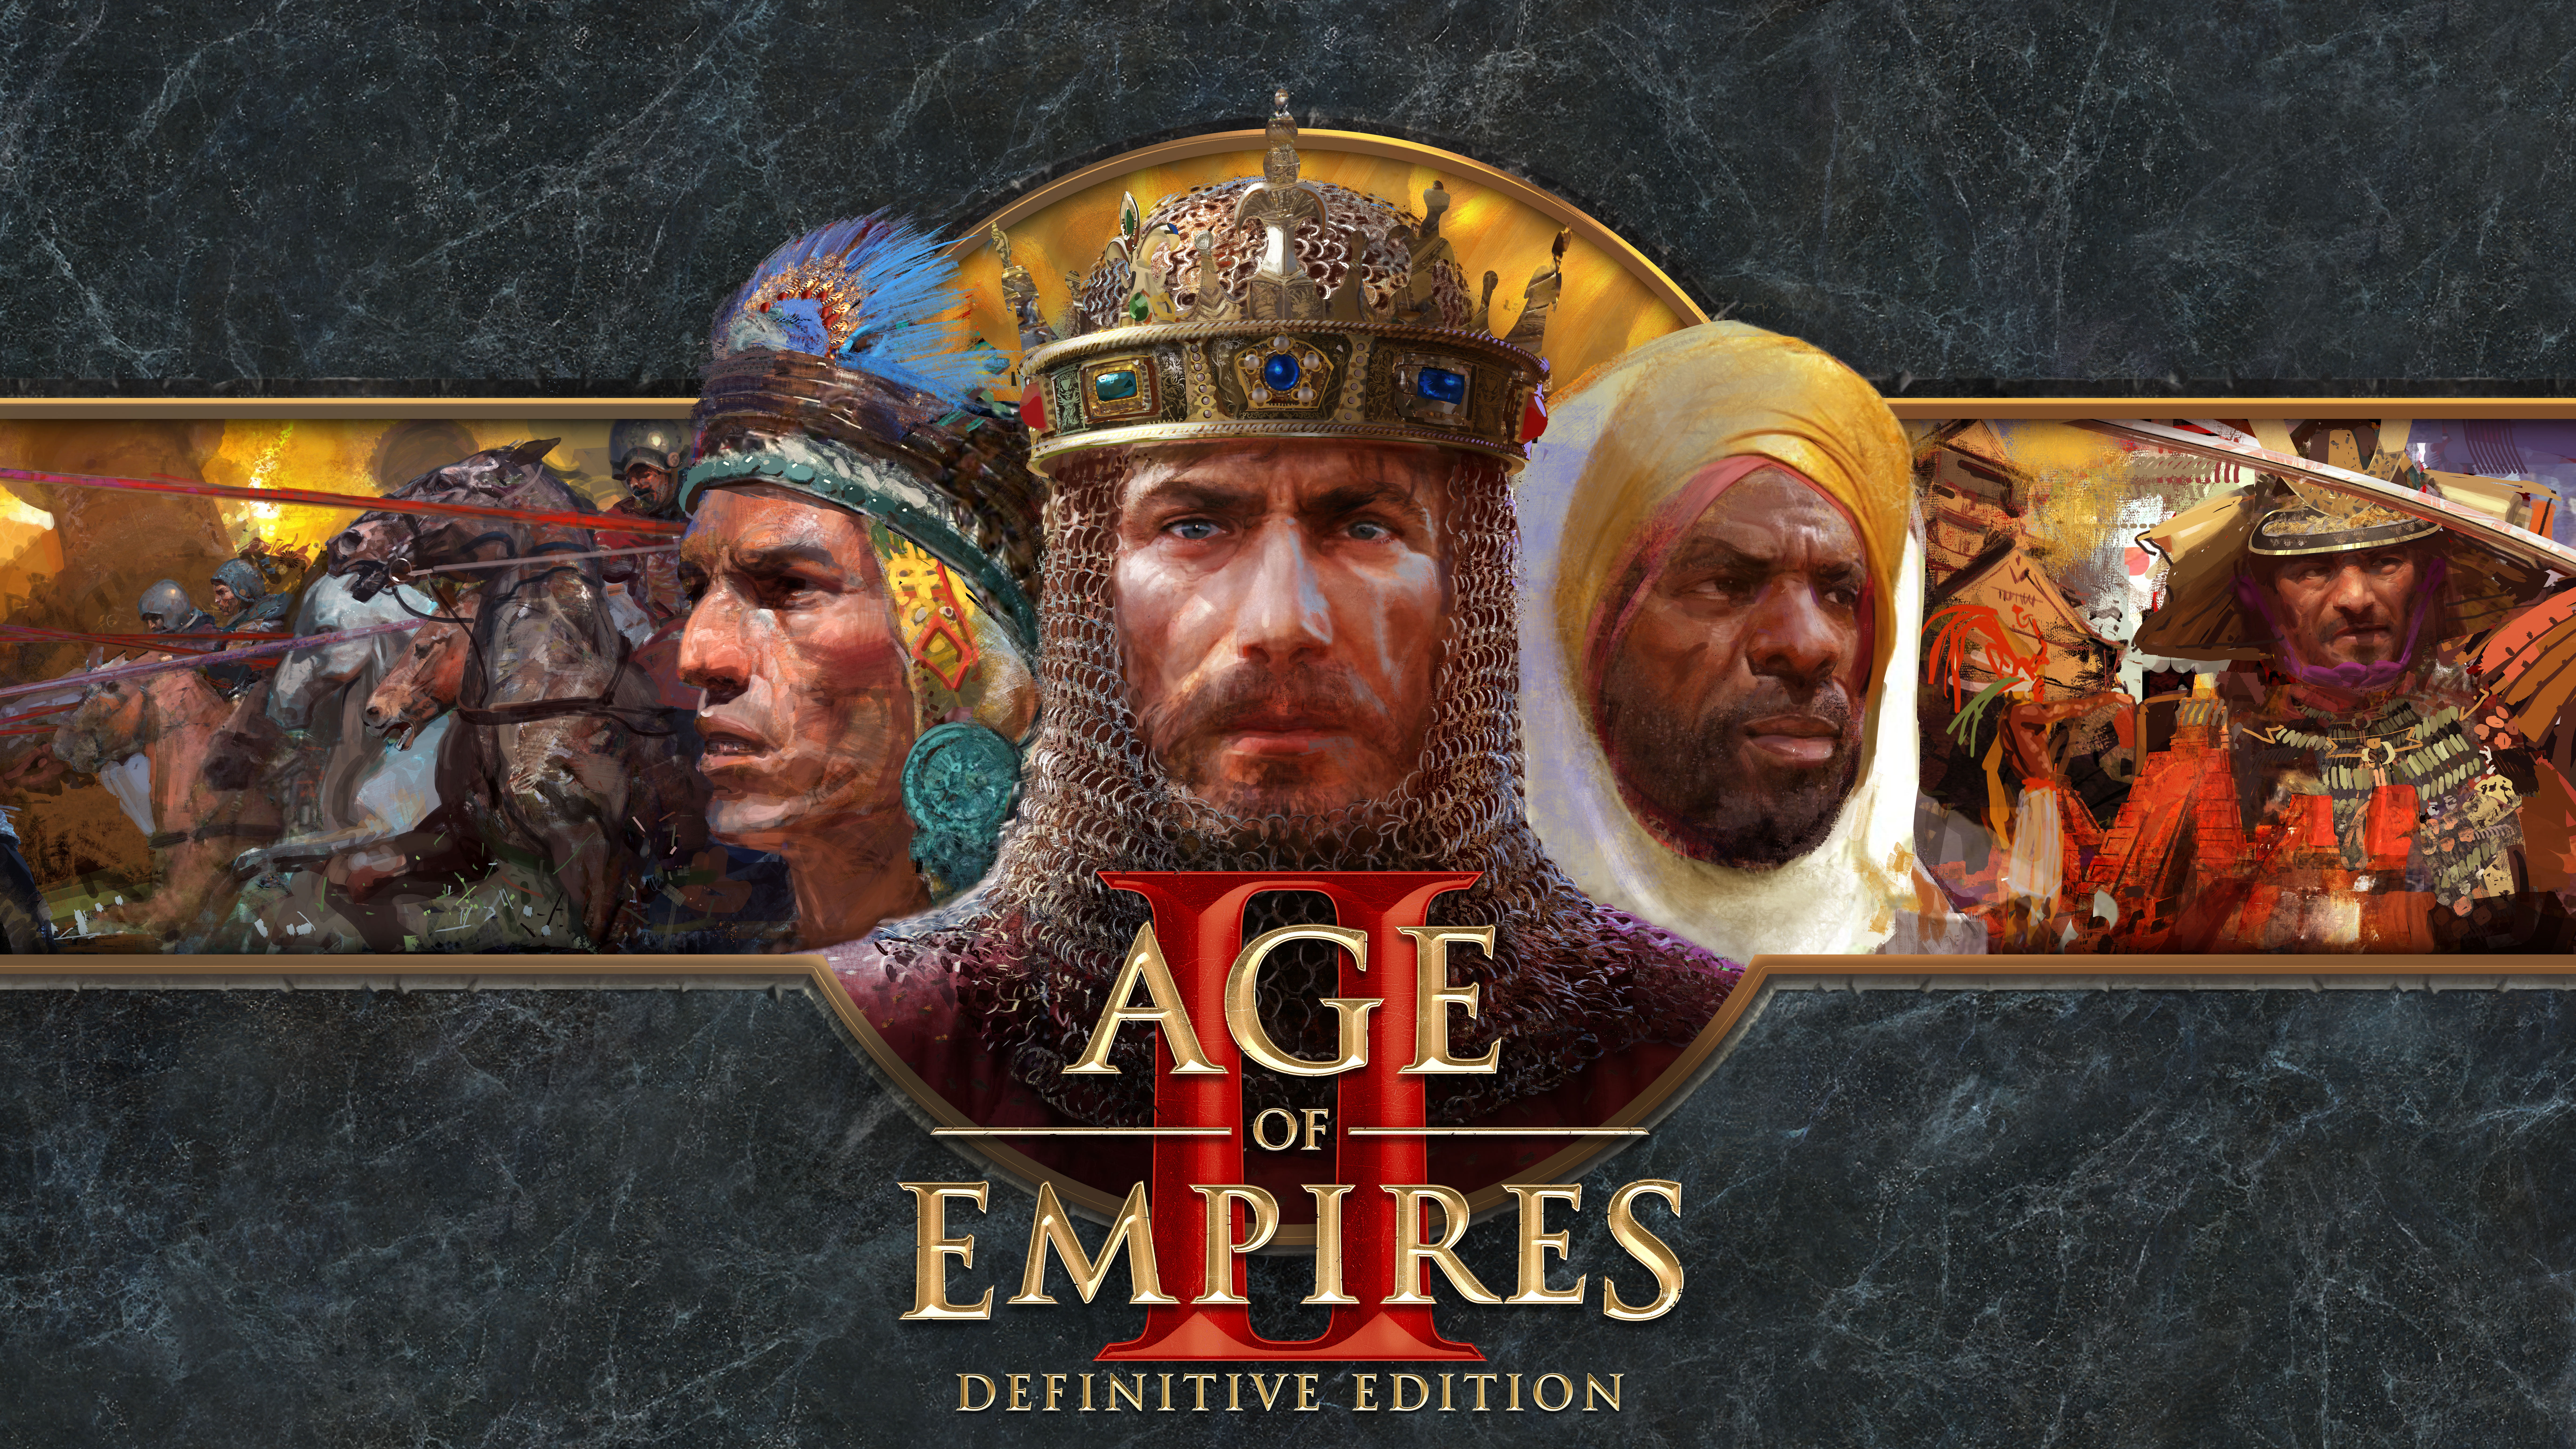 age of empire 2 hd heroes mod